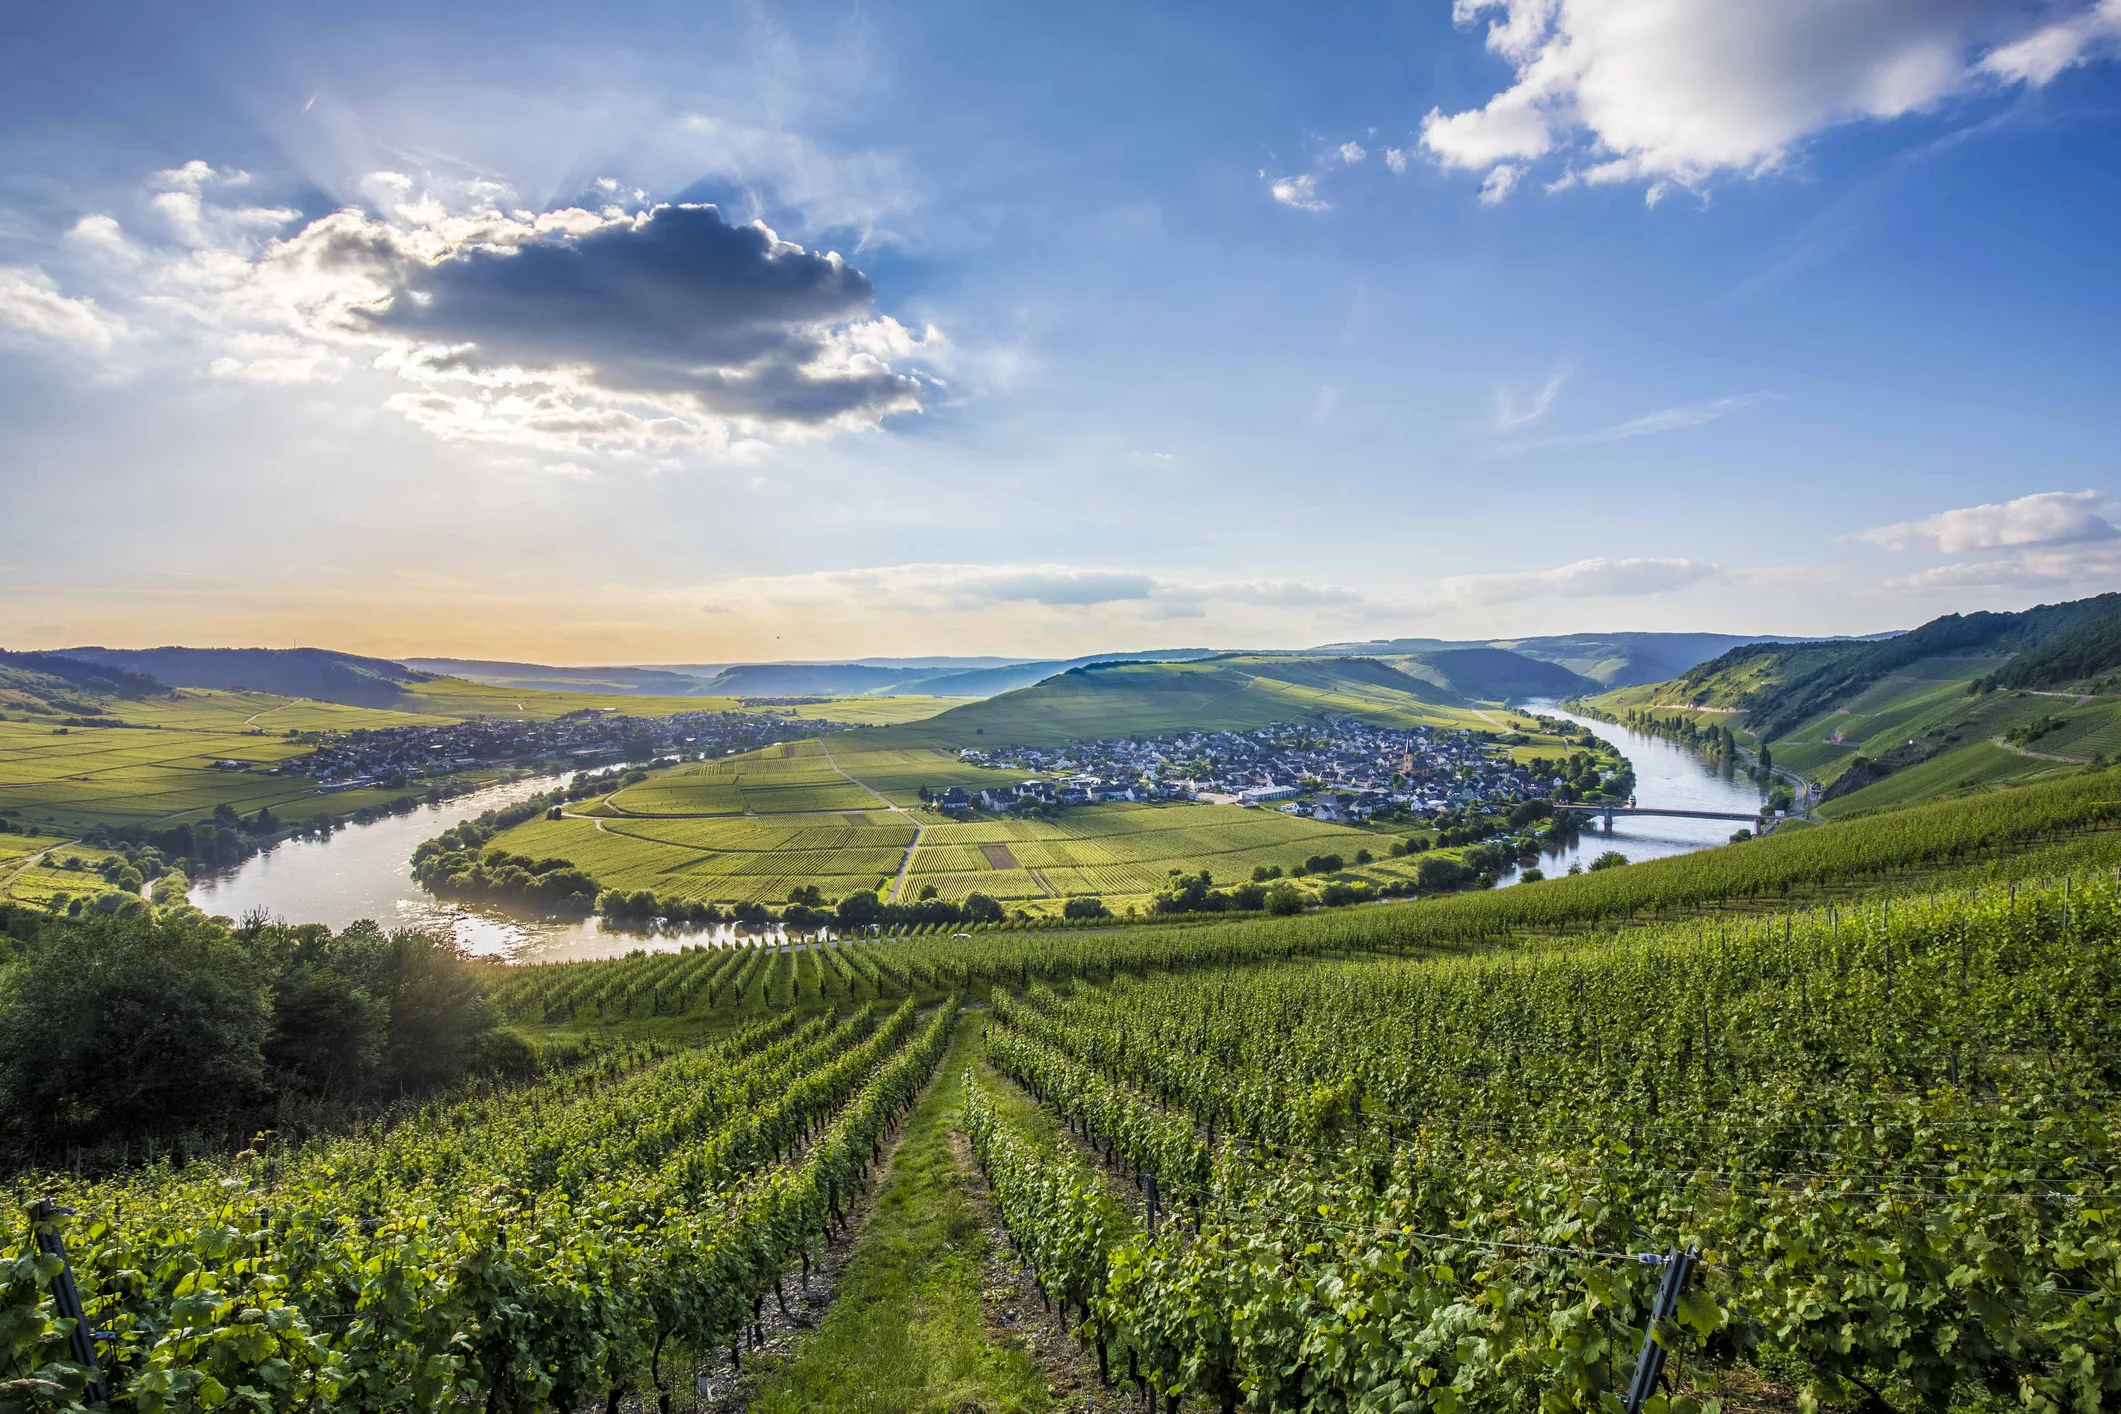 Vibrant green vineyards with a view of the Moselle river bend in the distance